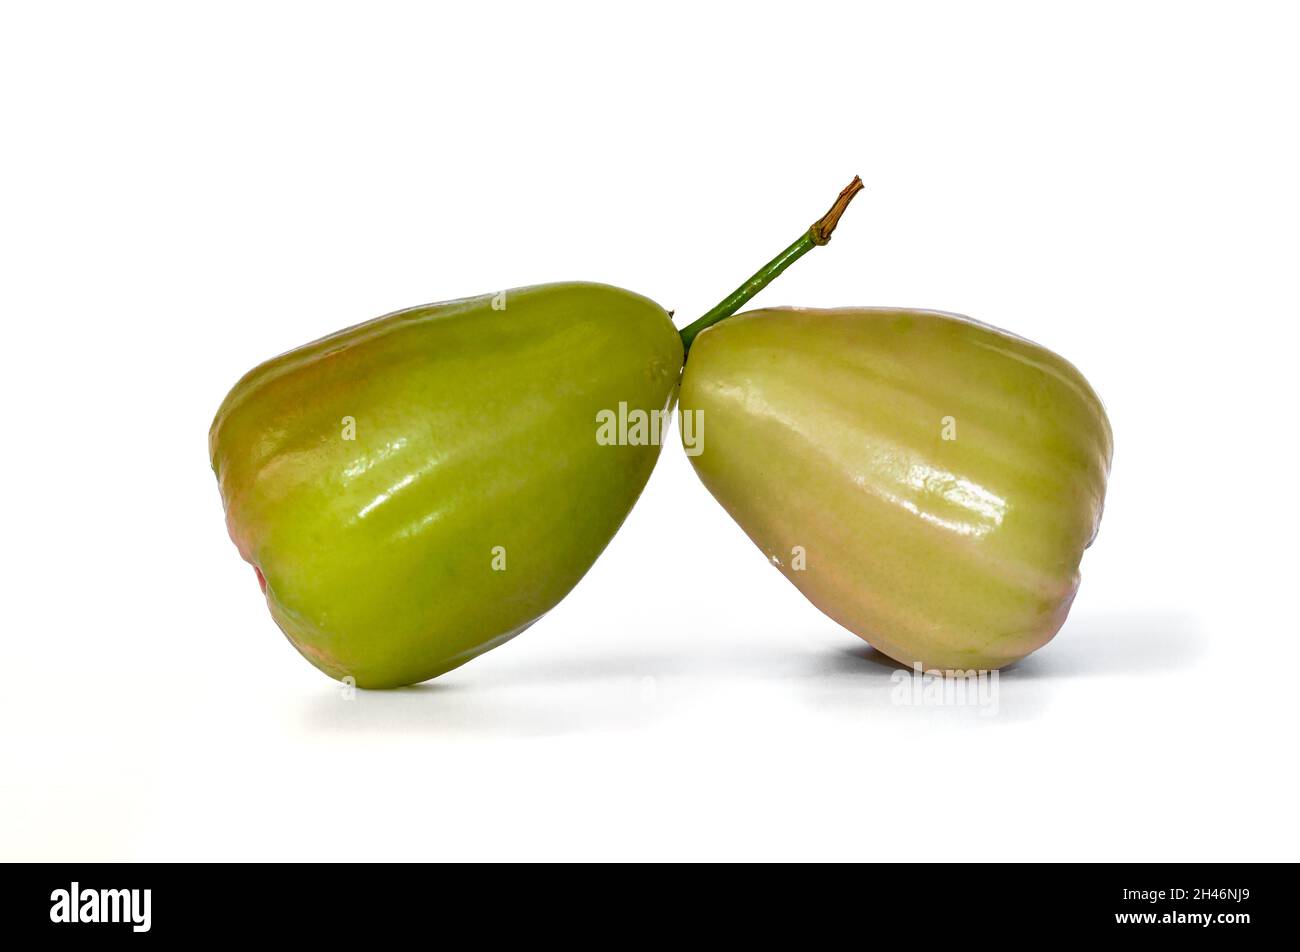 Two ripe and ready-to-eat rose apples, known as Jambu Madu Deli, has green  colour and has a very sweet taste. This species comes from Deli Indonesia. Stock Photo